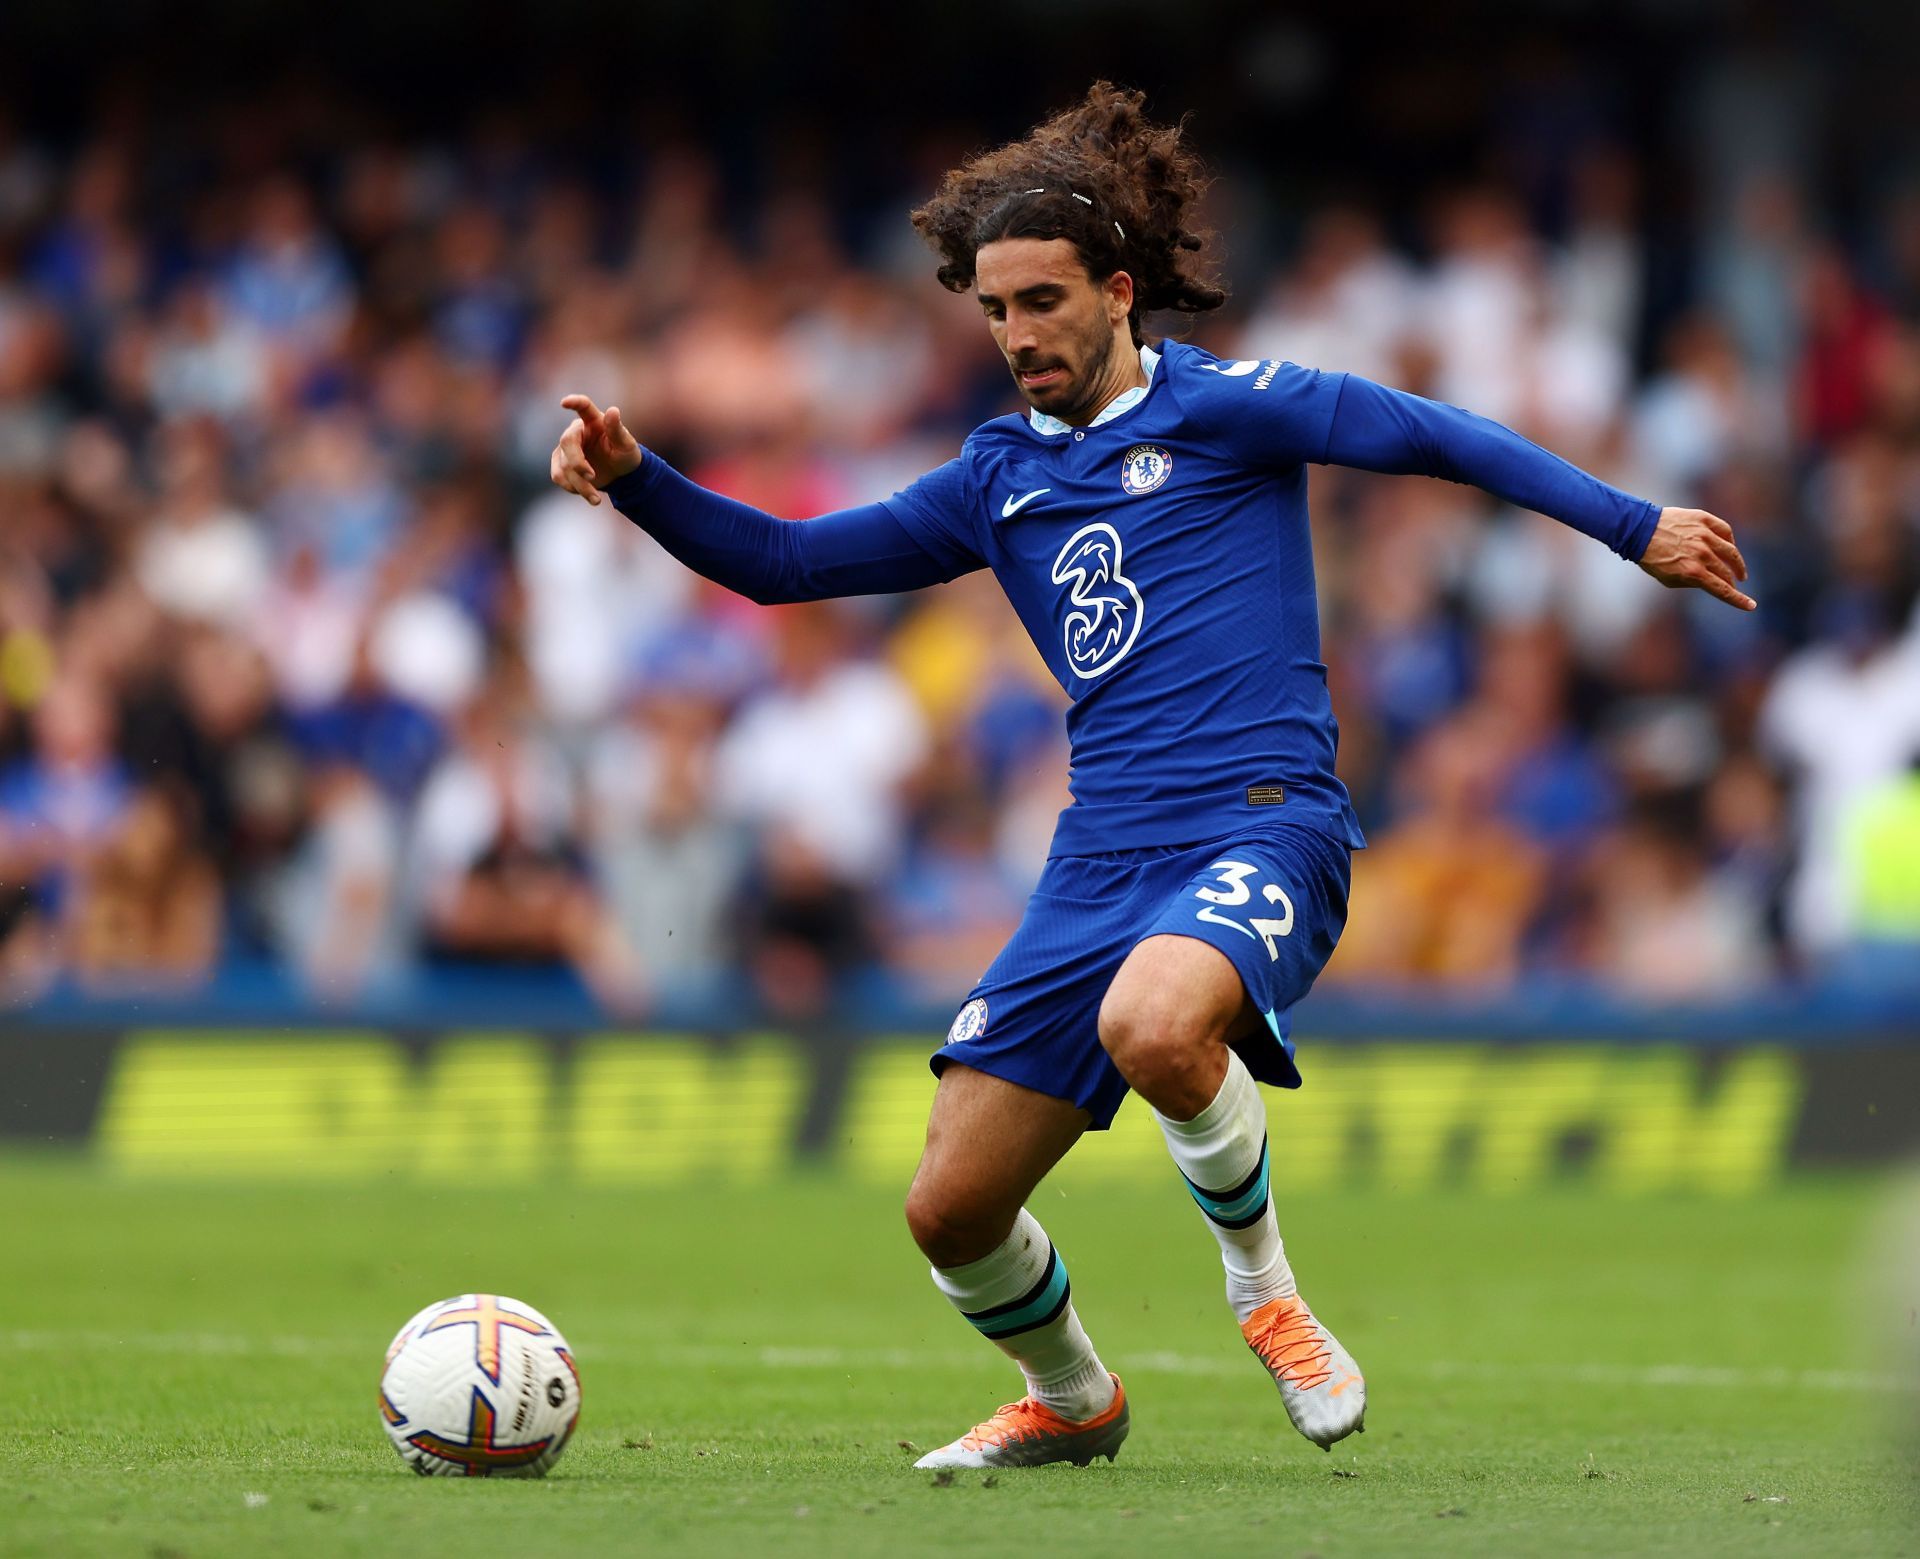 Cucurella was a stand out performer against Wolves